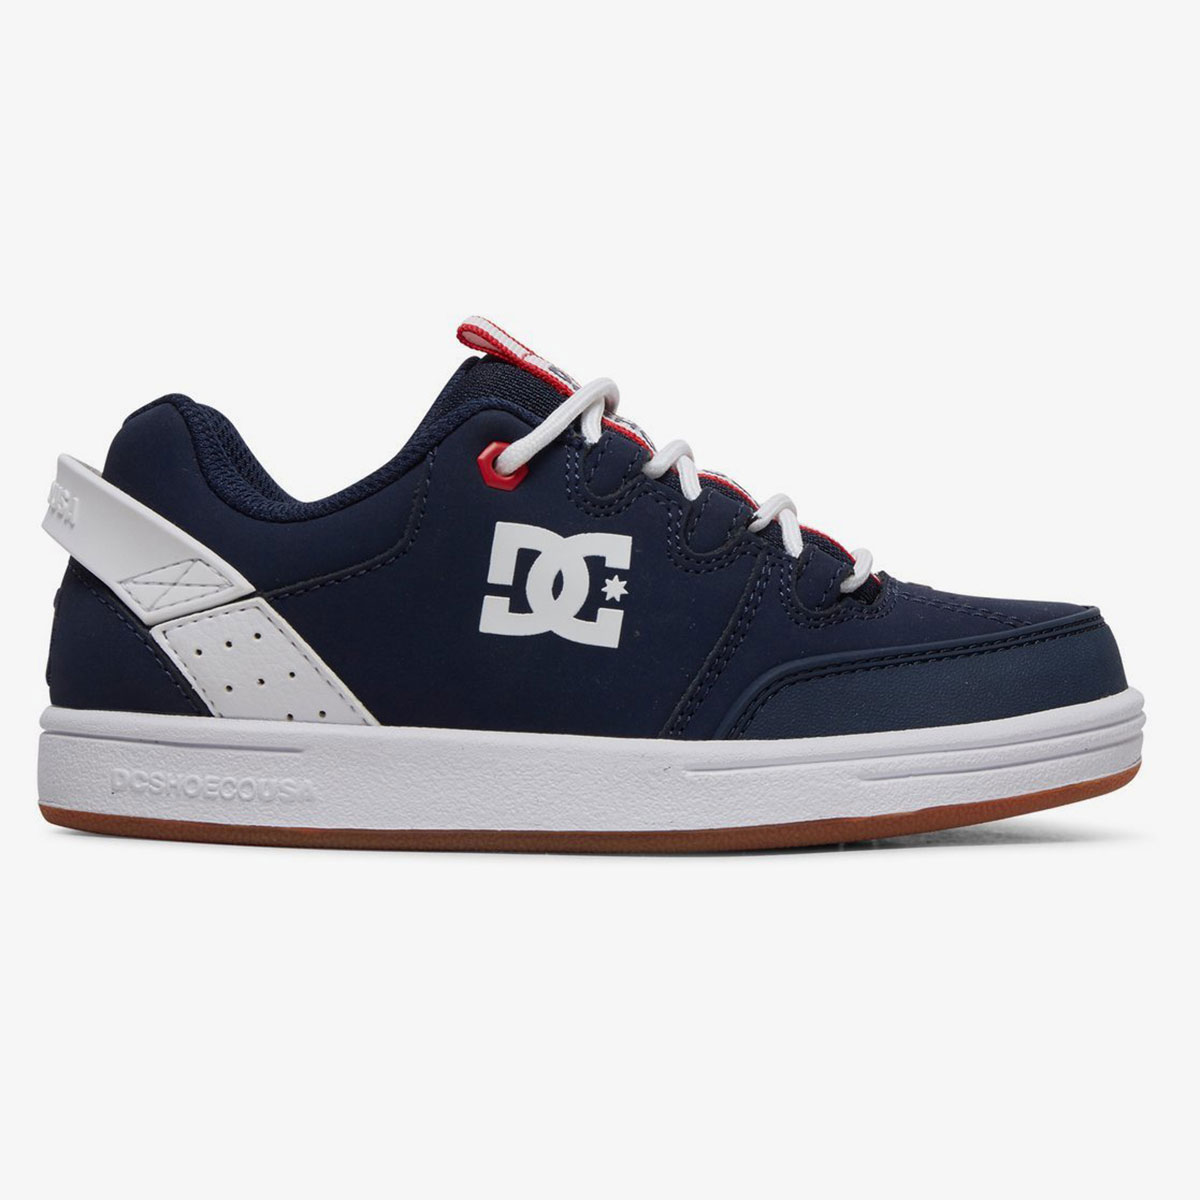 DC Shoes Syntax Navy/Red 